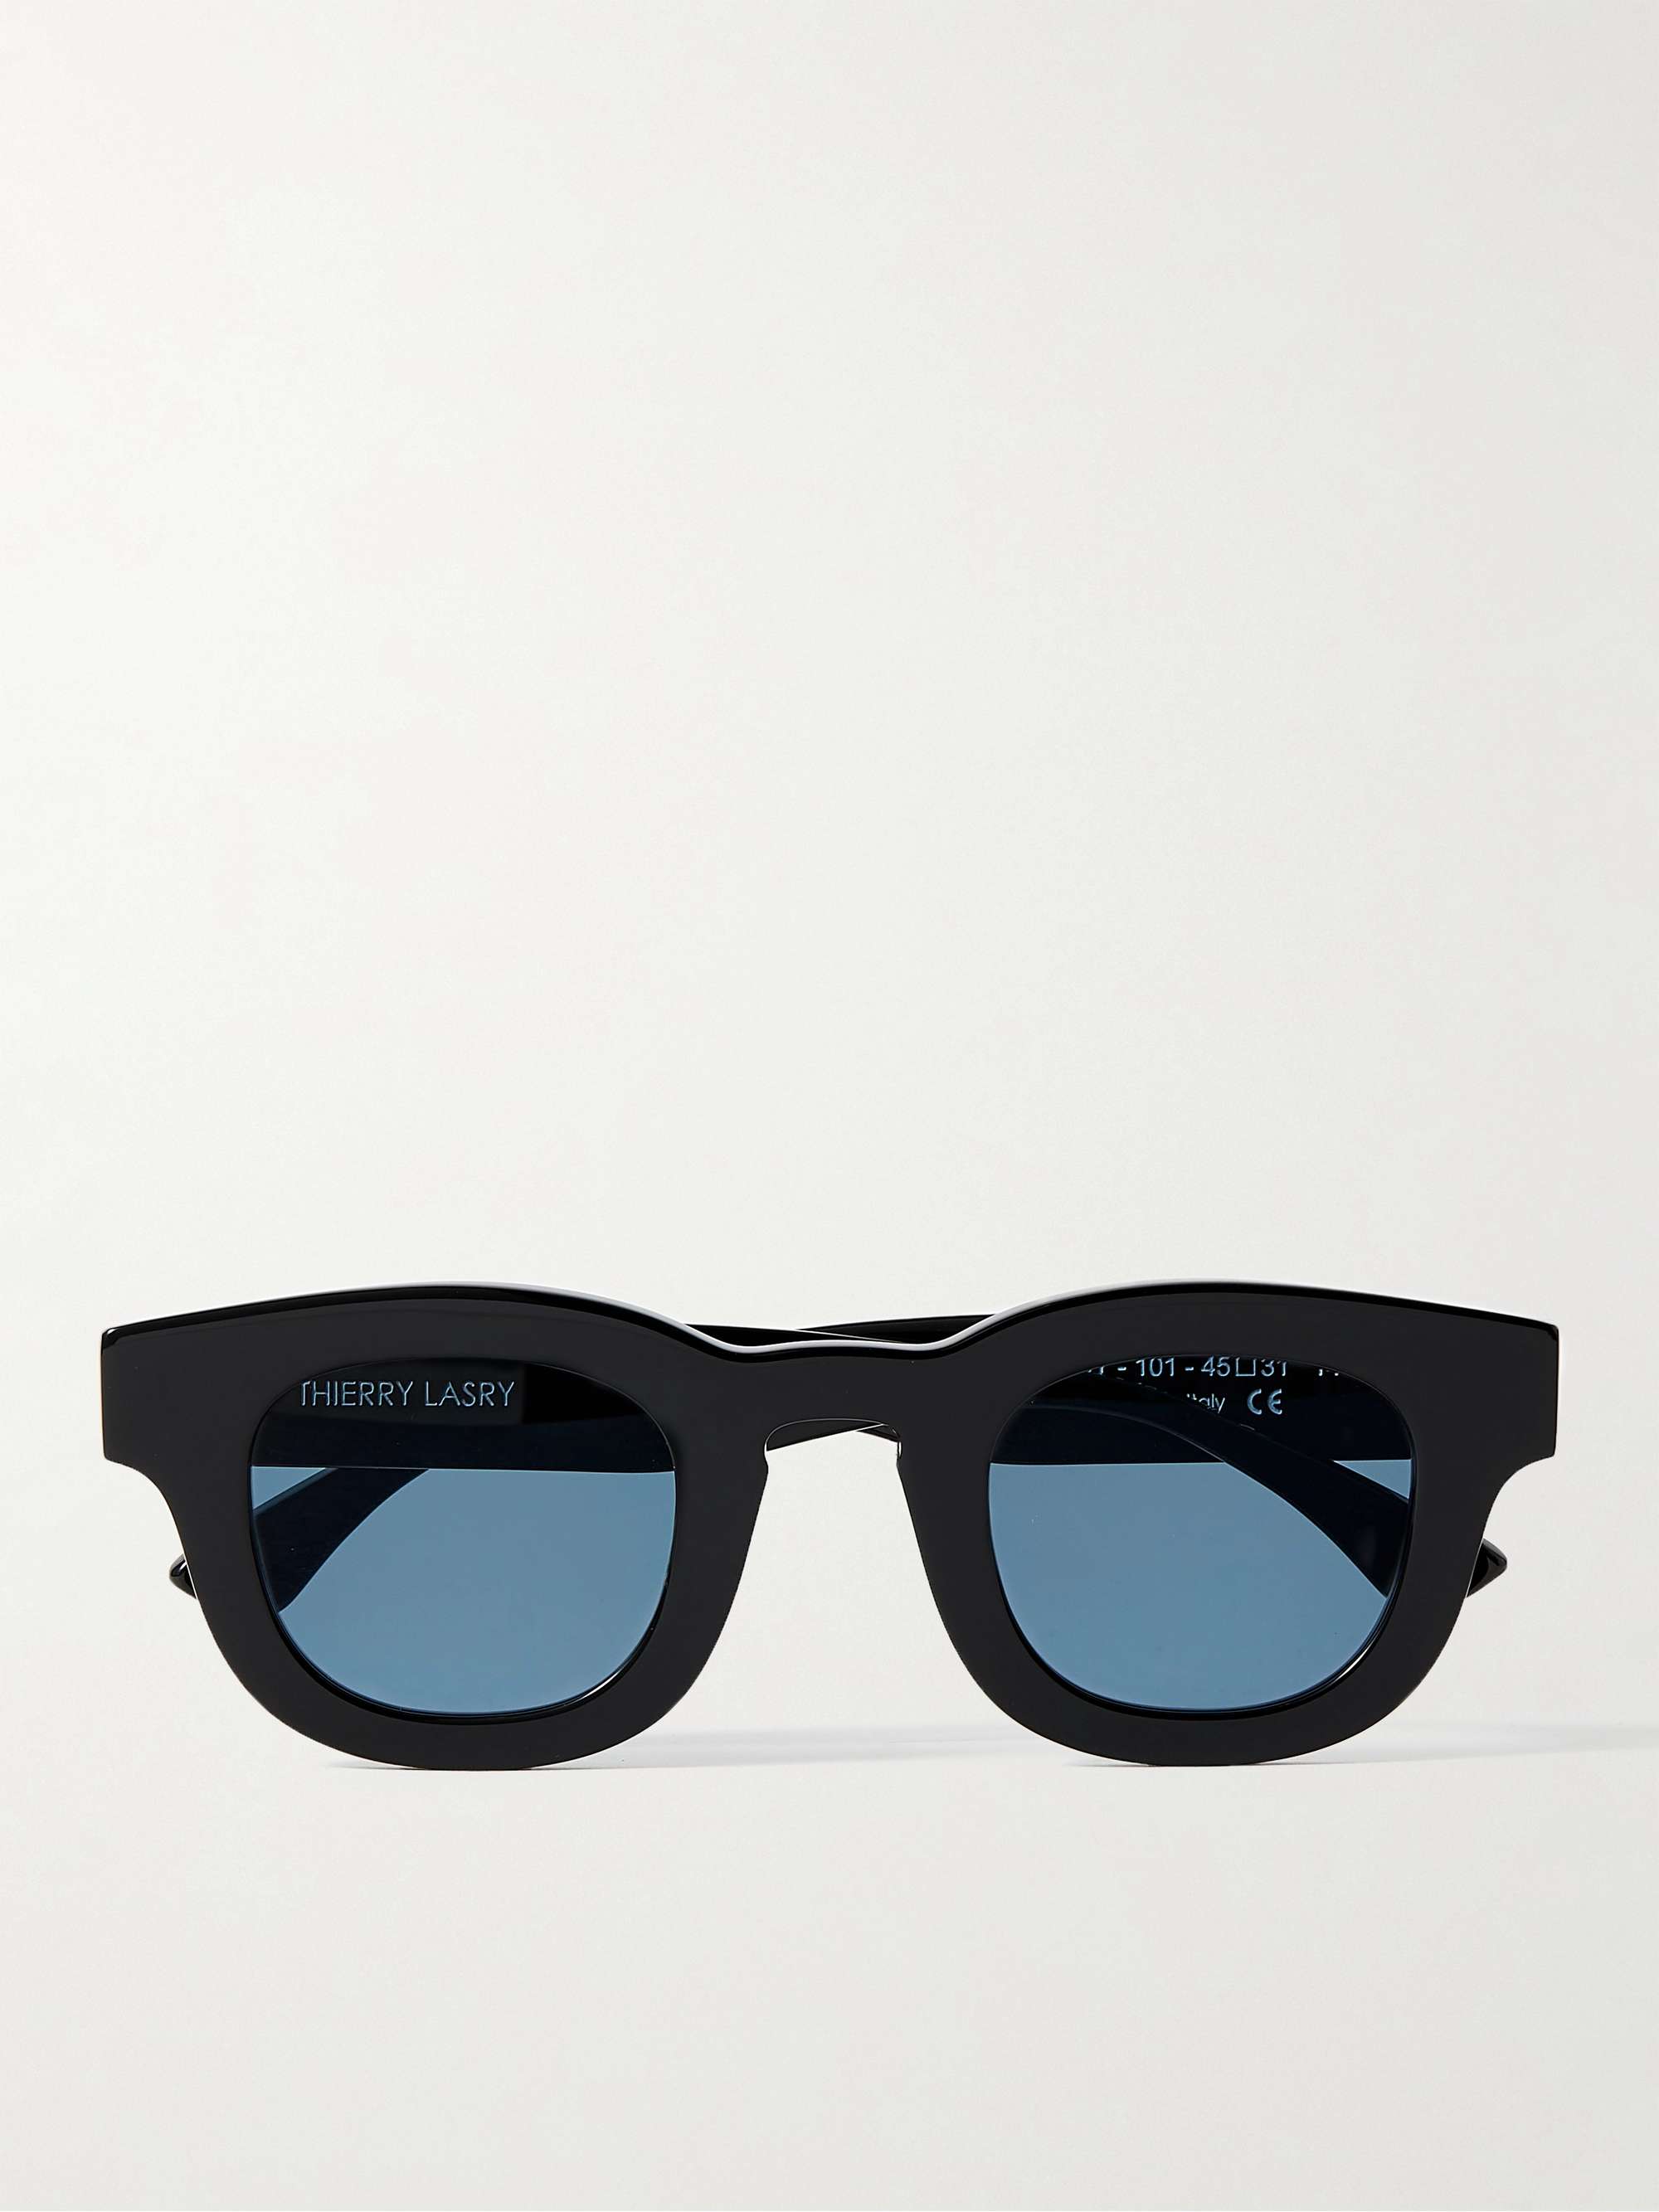 THIERRY LASRY Darksidy D-Frame Acetate Sunglasses